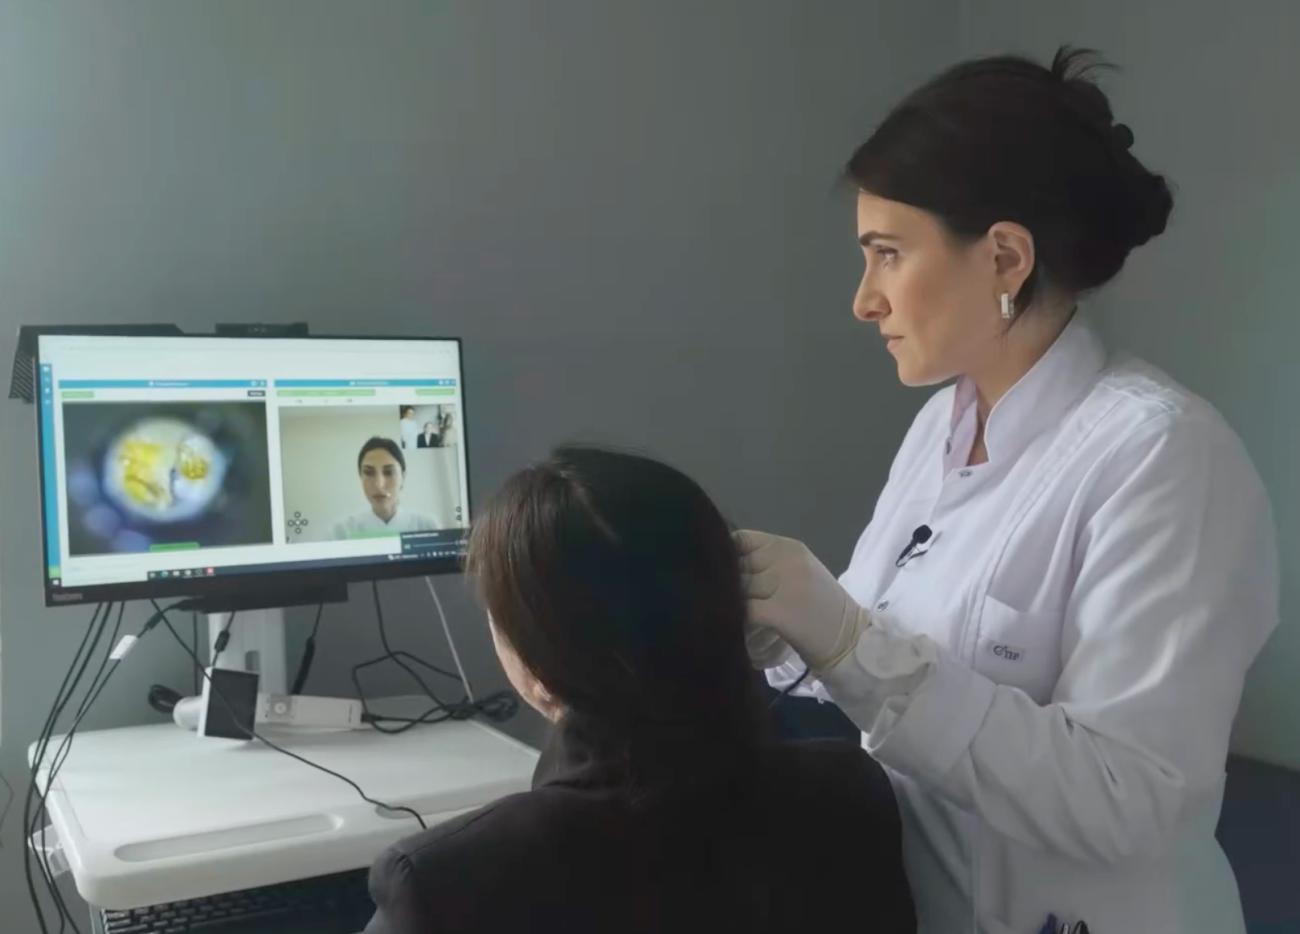 A doctor in a white coat diagnoses a woman in black clothing while another doctor is on a computer screen in front of them.